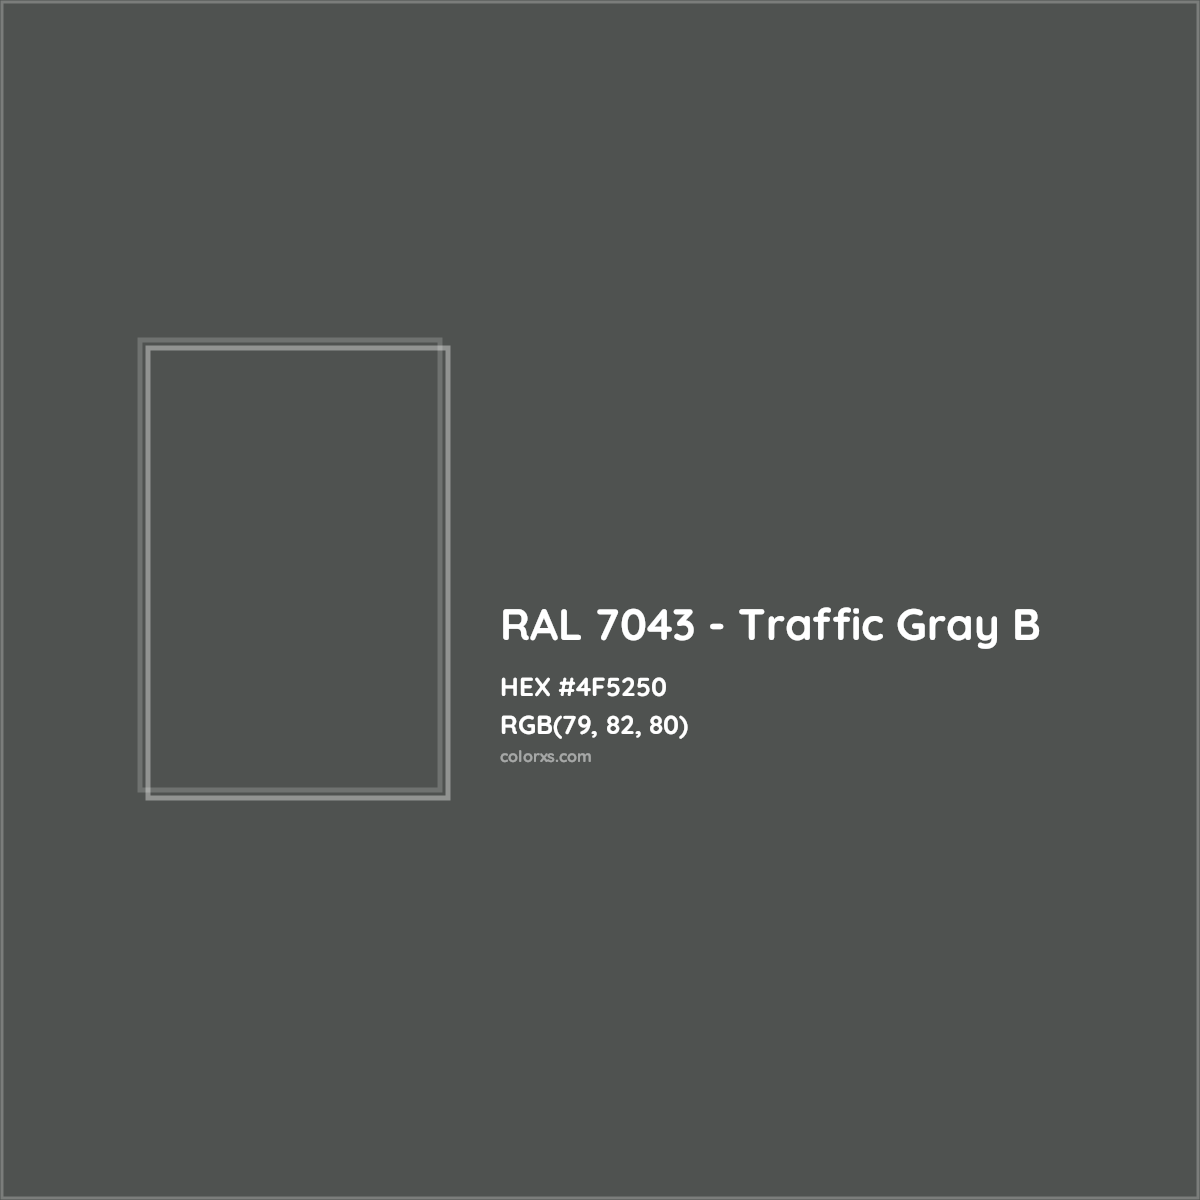 HEX #4F5250 RAL 7043 - Traffic Gray B CMS RAL Classic - Color Code